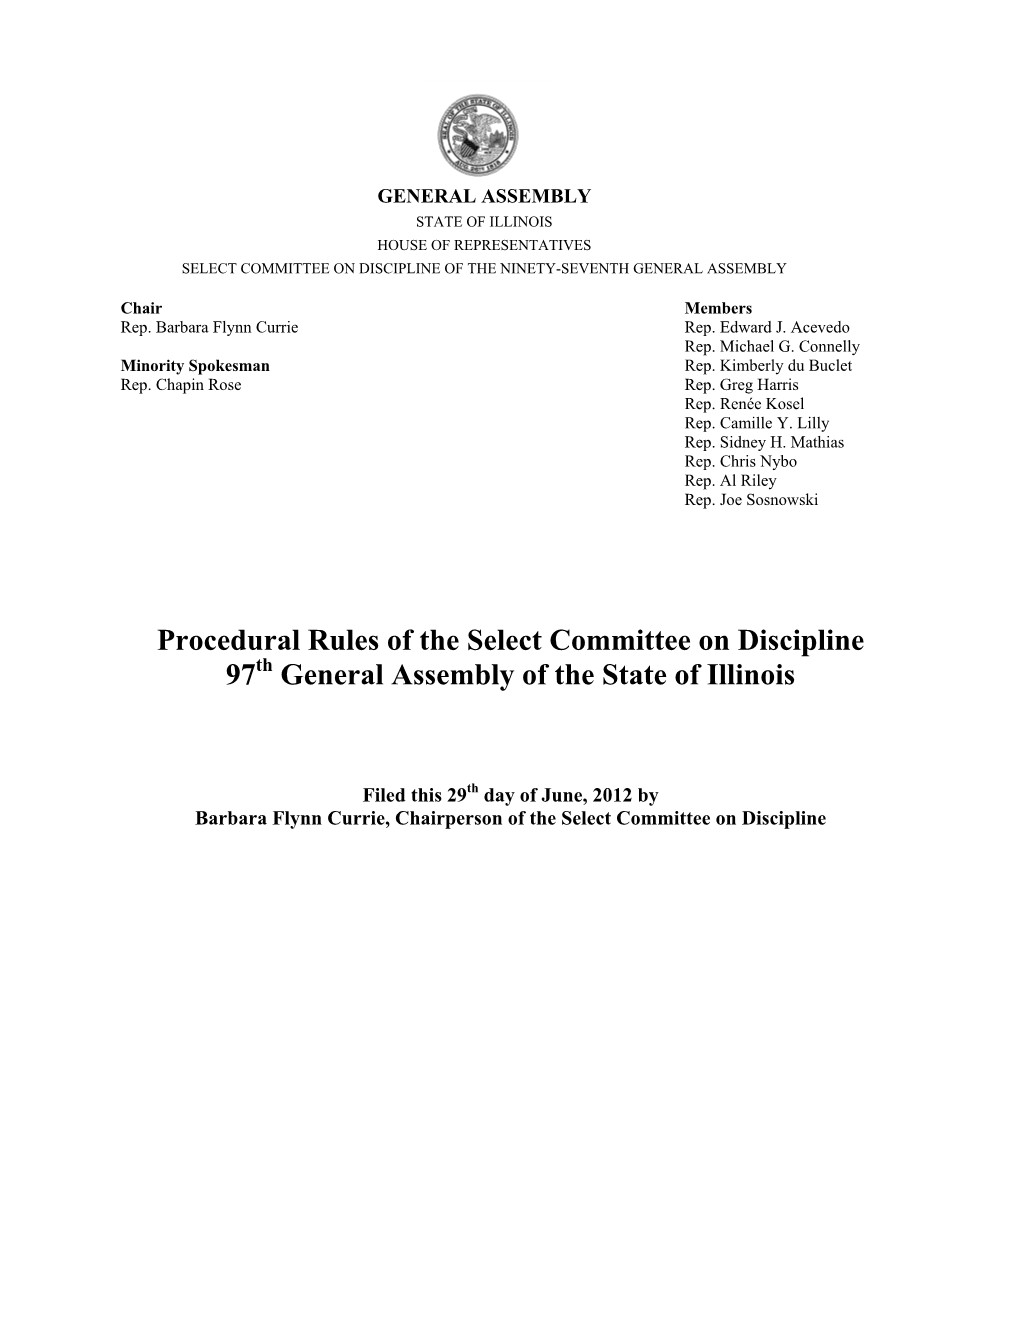 Committee Procedural Rules